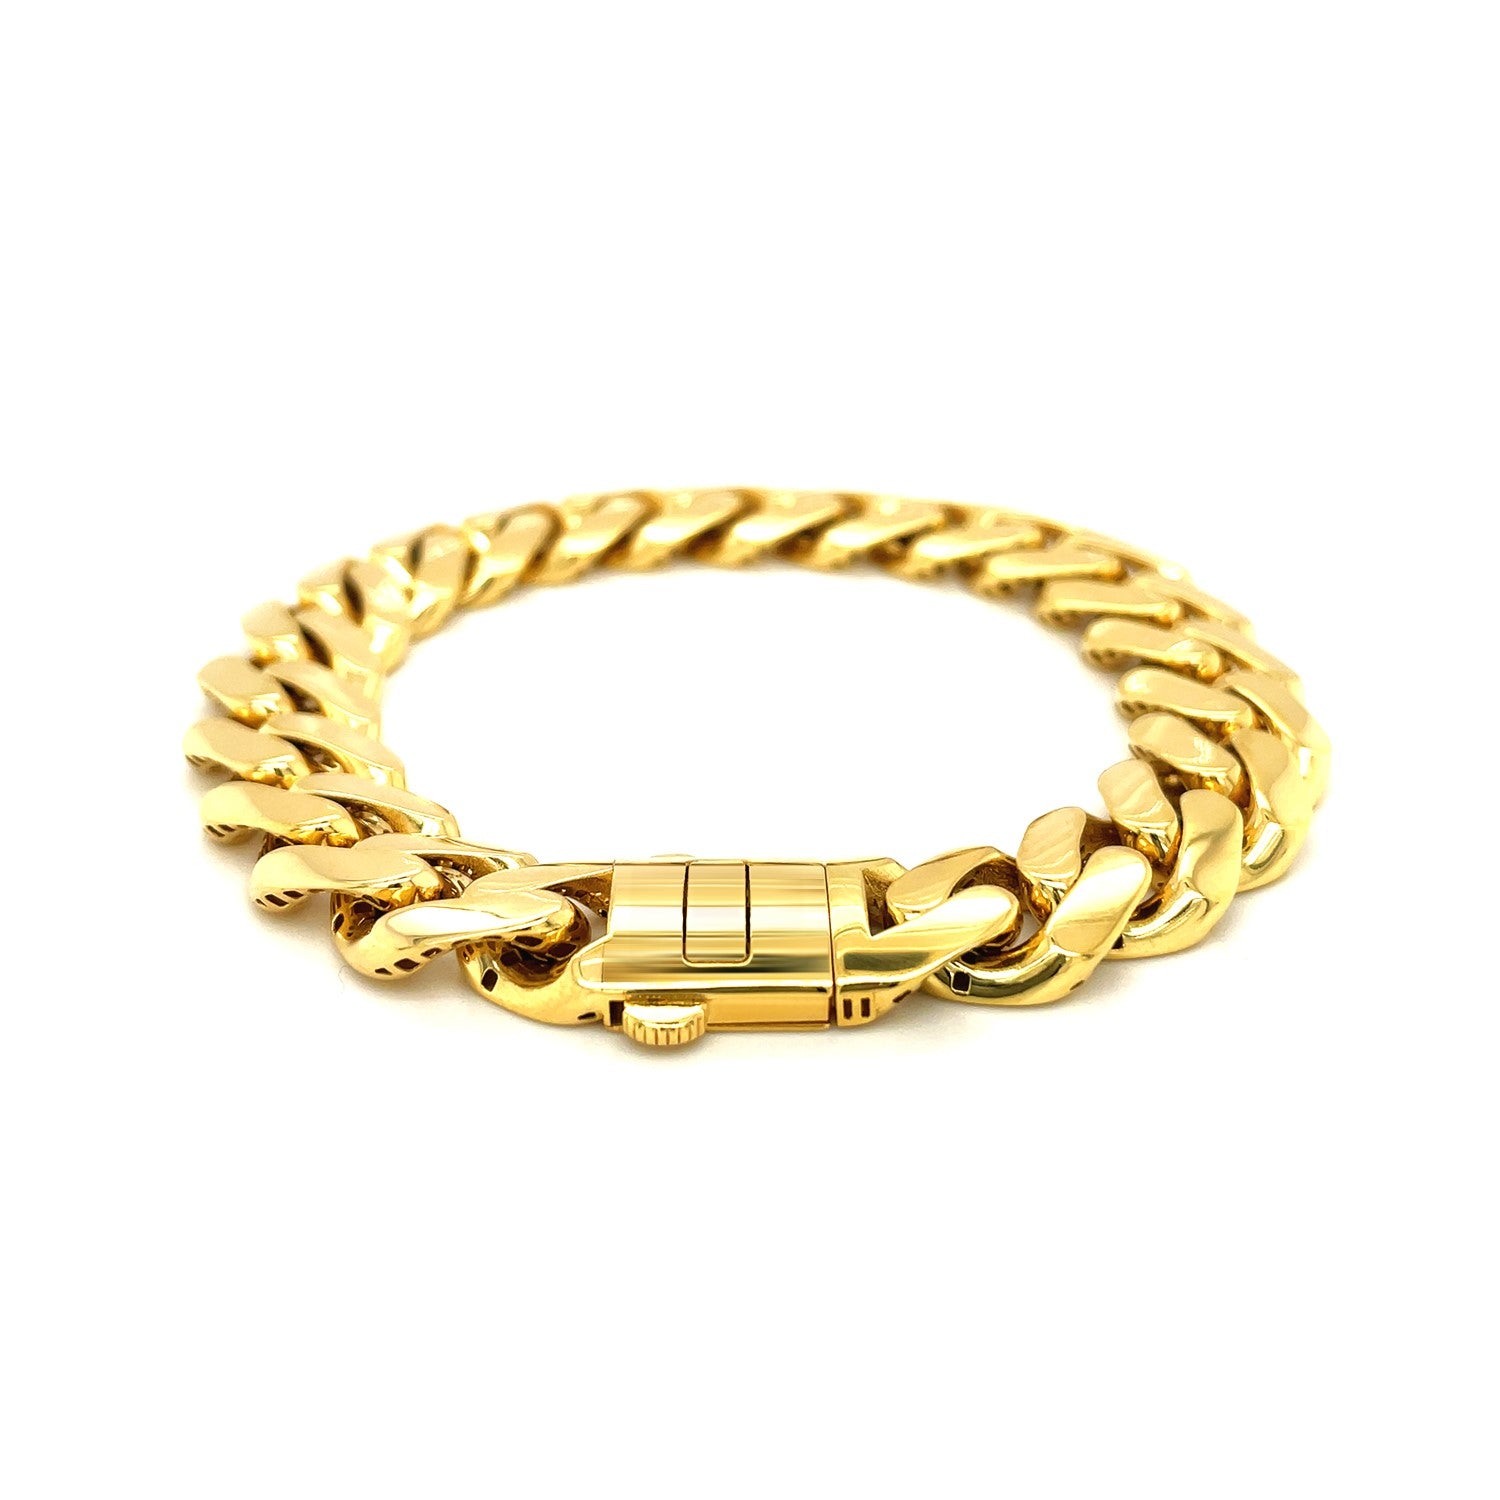 14k Yellow Gold 8 1/2 inch Wide Polished Curb Chain Bracelet